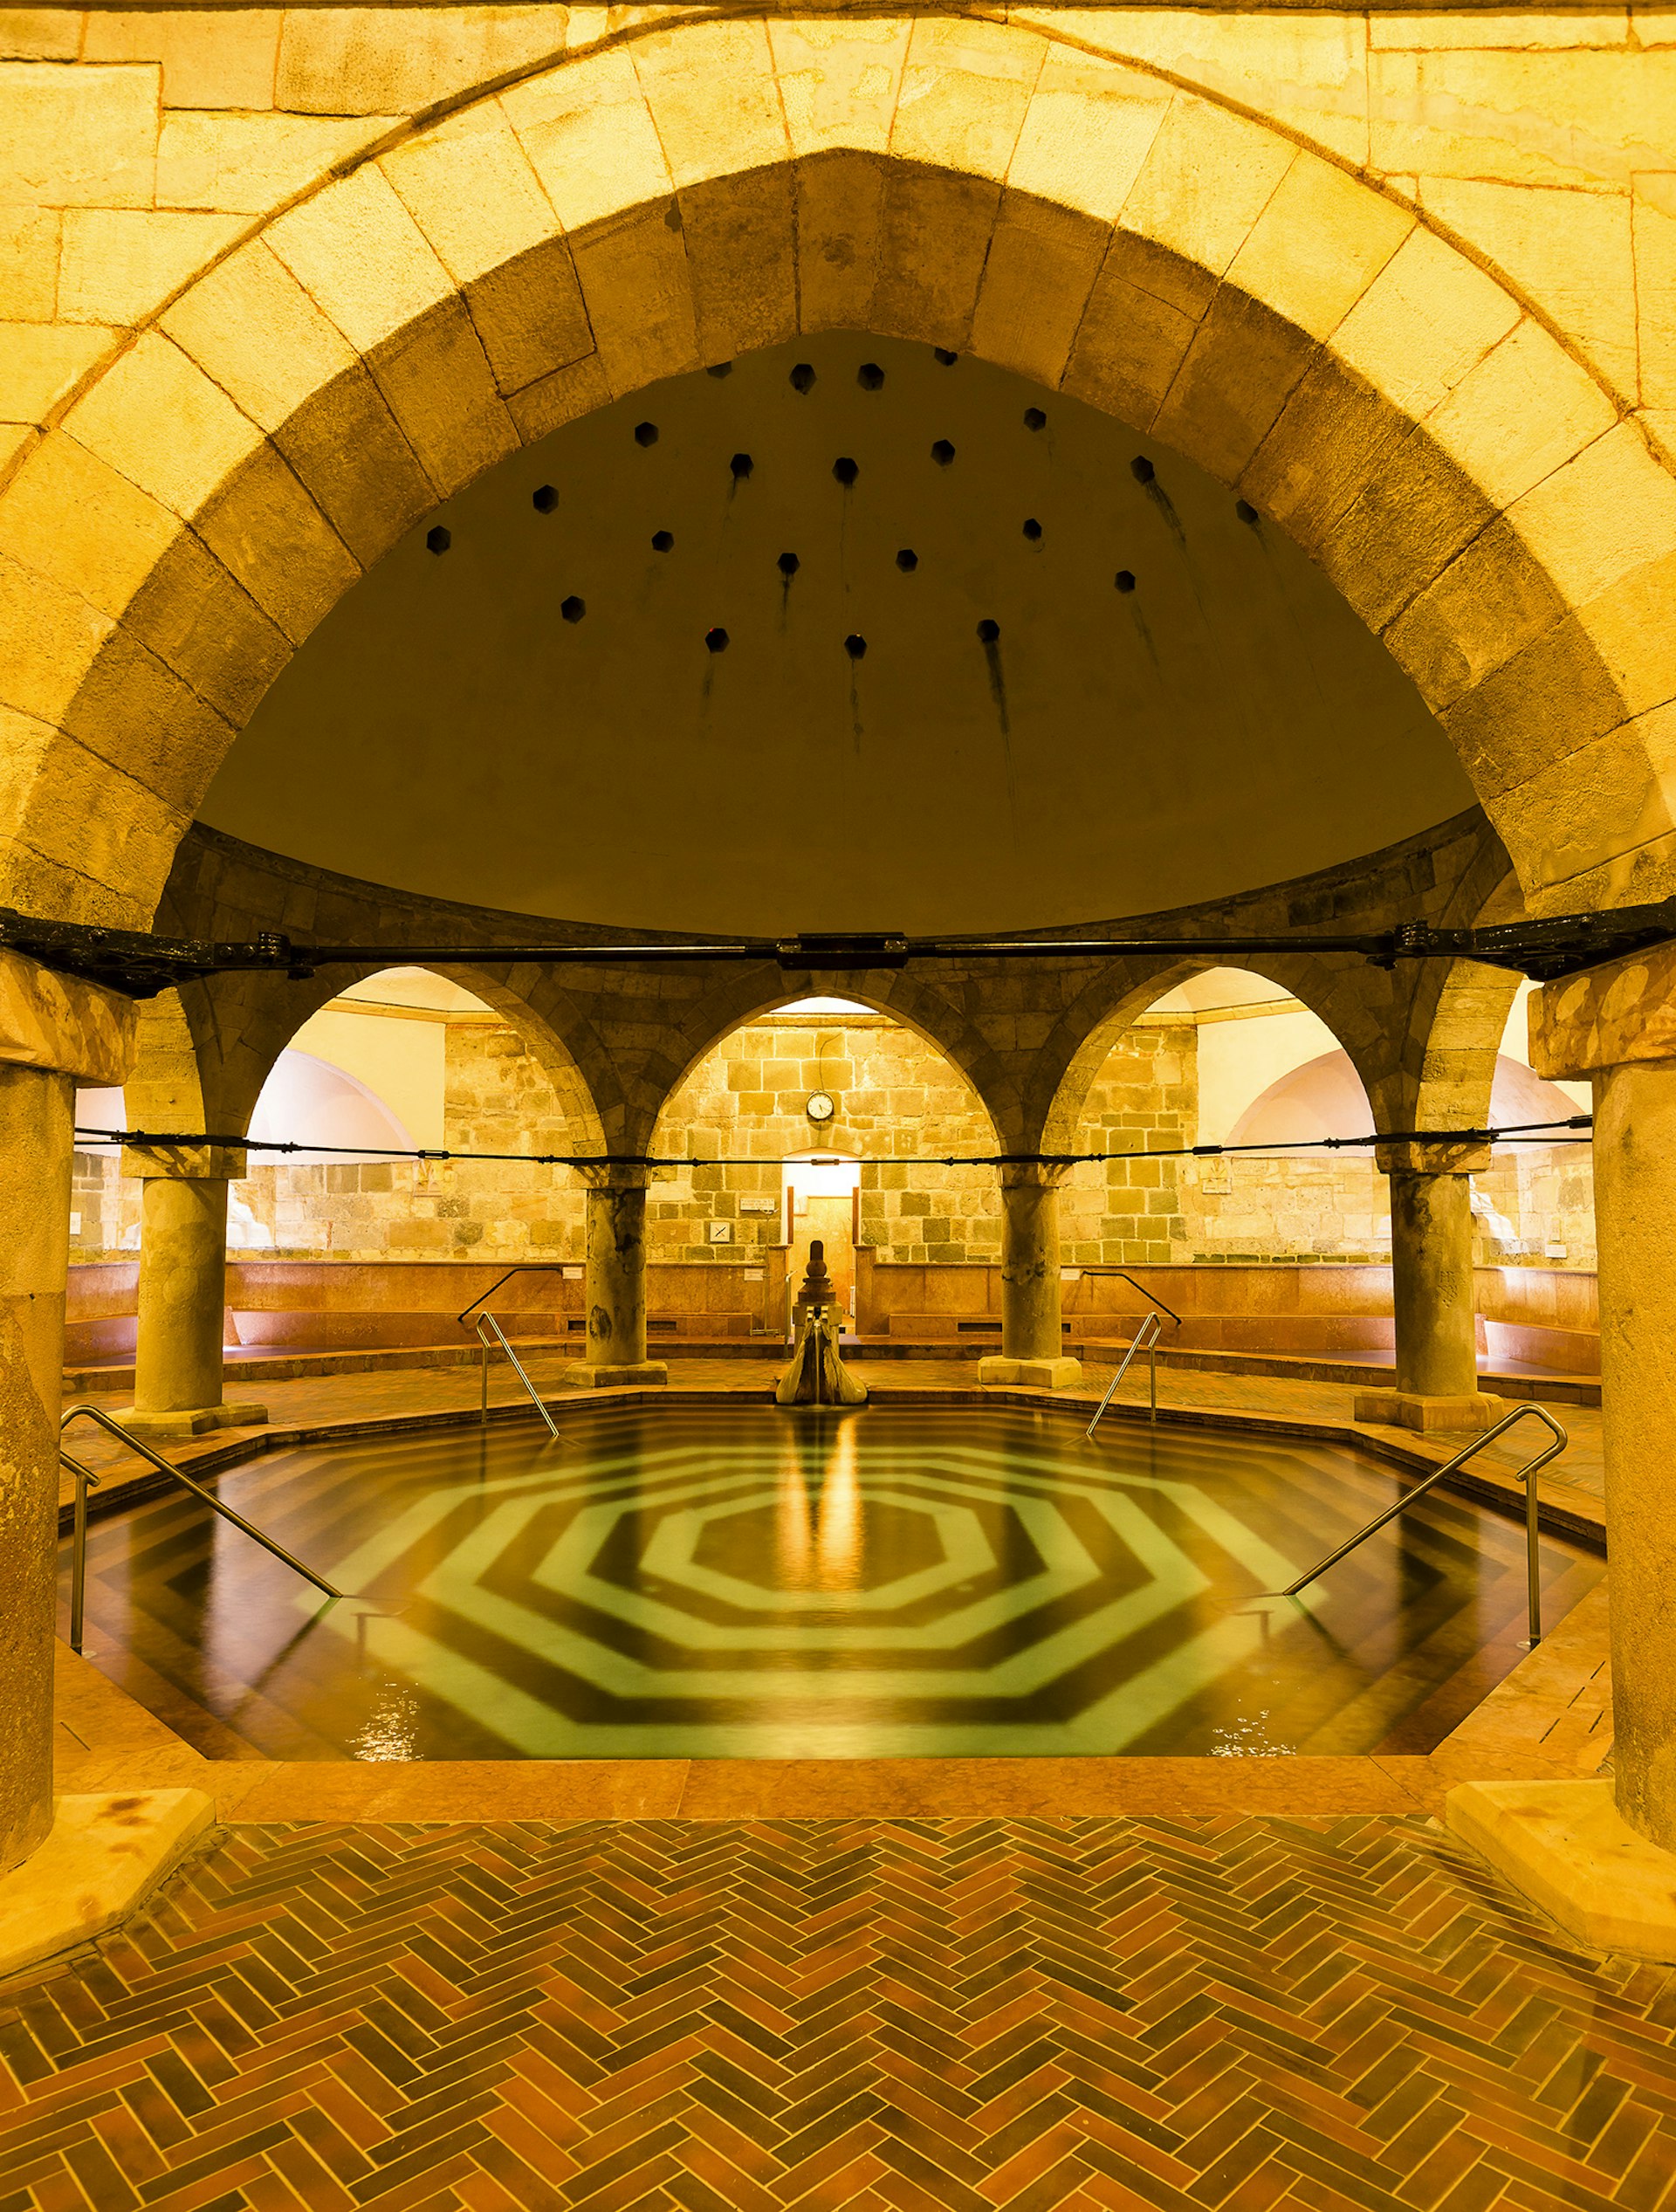 An octagonal pool sits below a domed ceiling in the warmly lit Rudas Baths, Budapest, Hungary